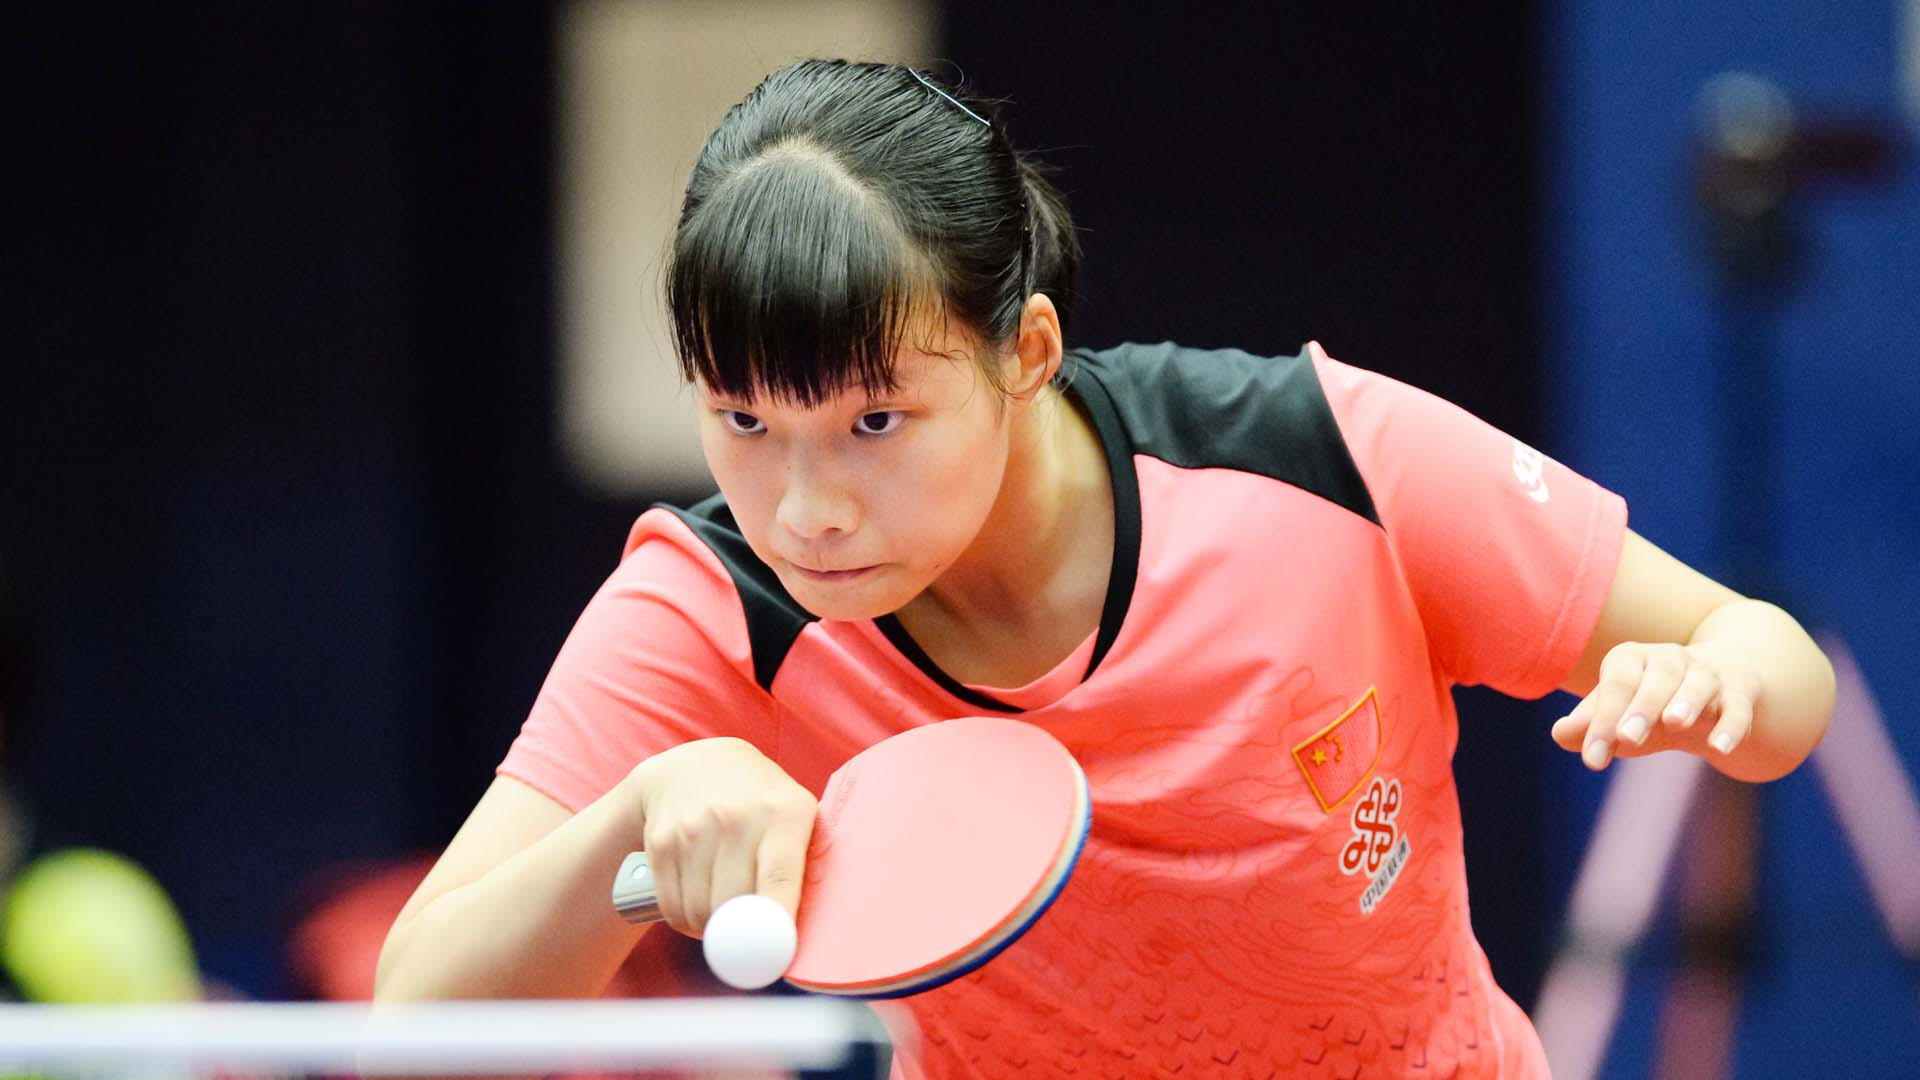 Shi Xunyao will be looking to retain China's titles in the girl's singles and doubles events at the World Junior Table Tennis Championships in Australia ©IITF